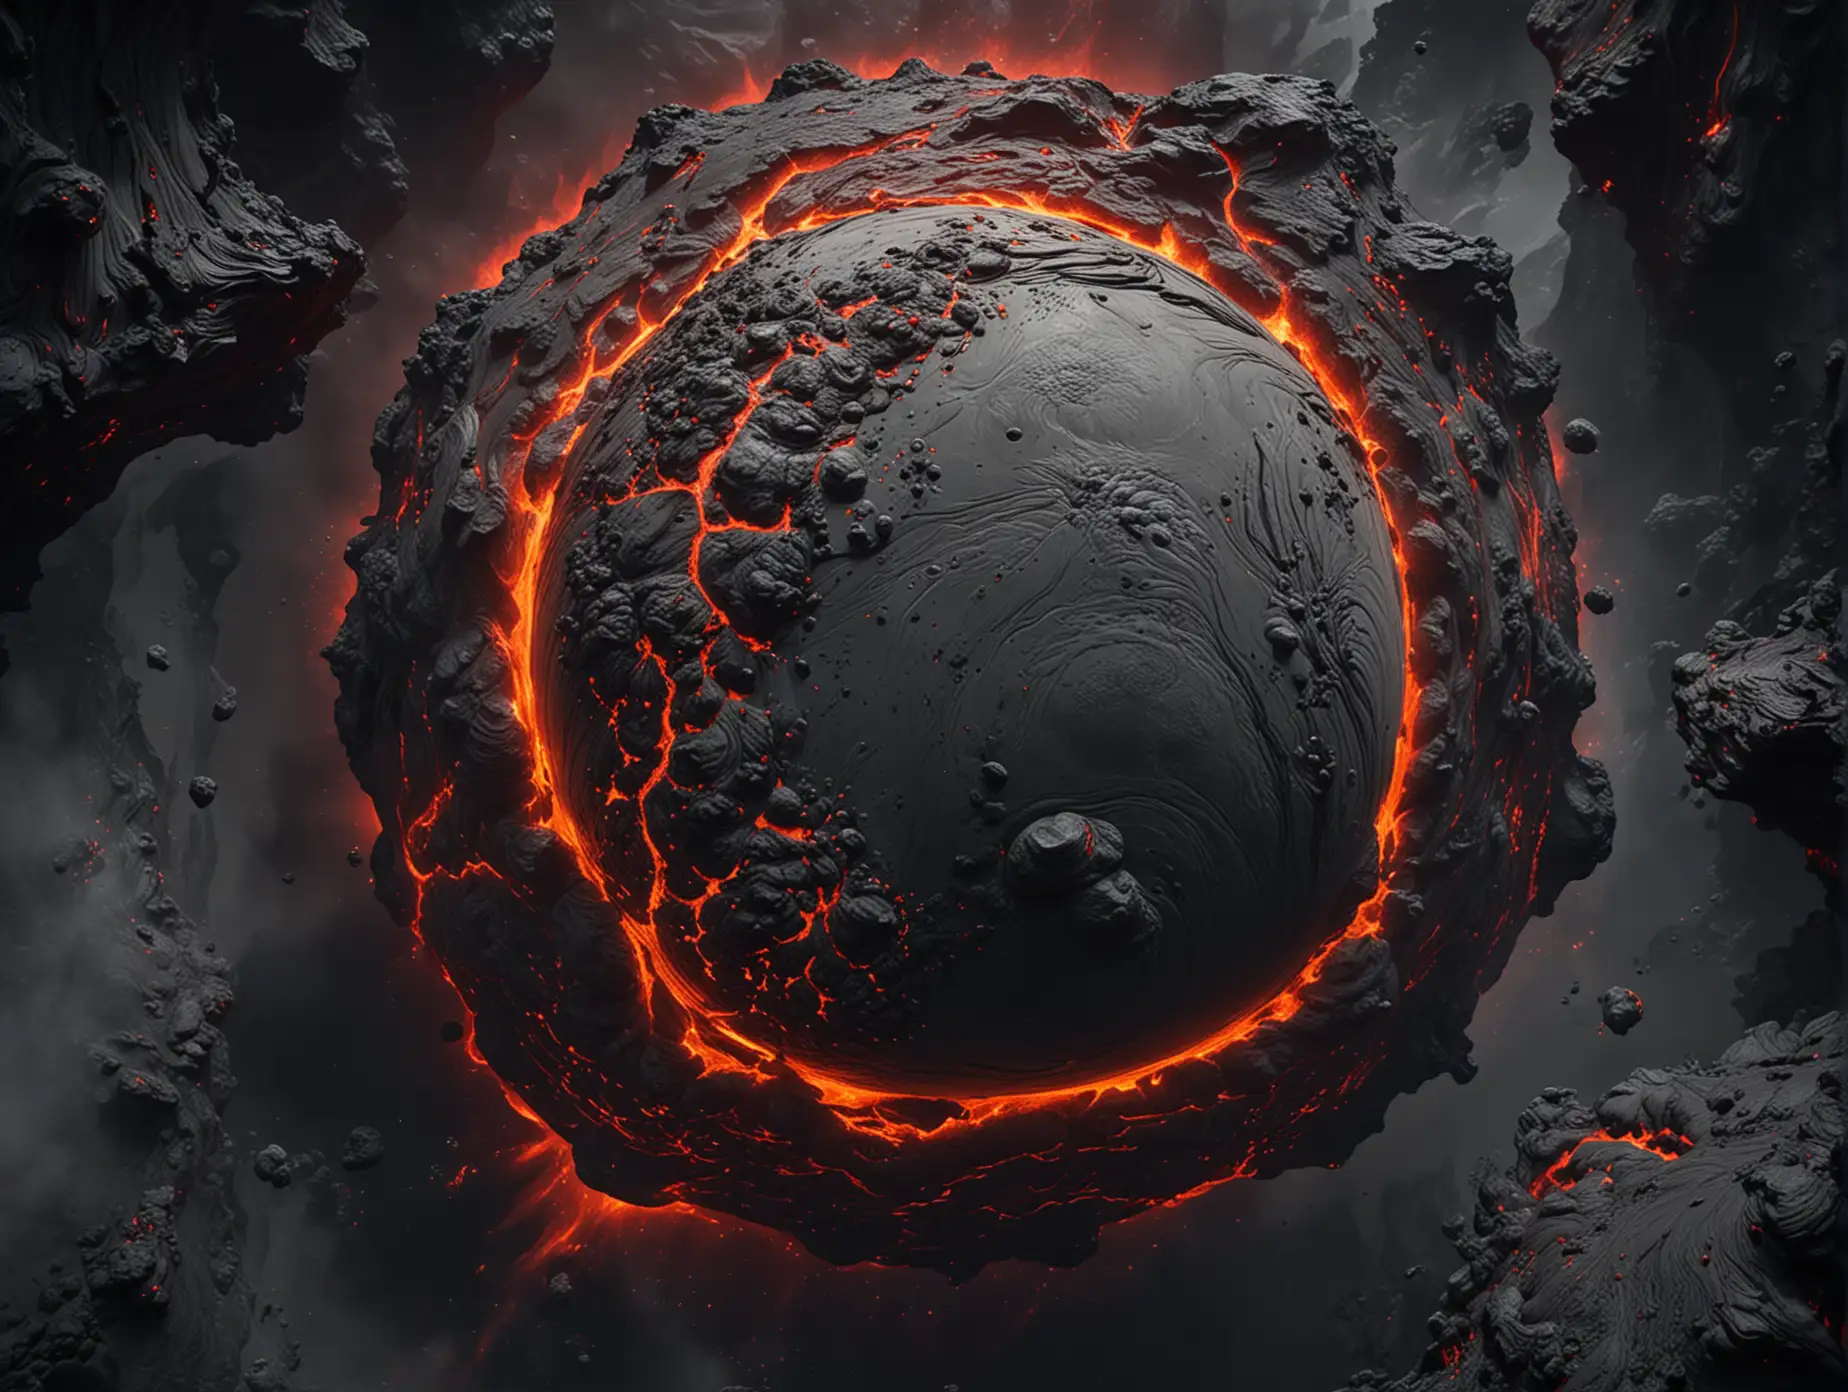 A grey full body planet with lava rivers.  THE IMAGE is FROM THE SPACE